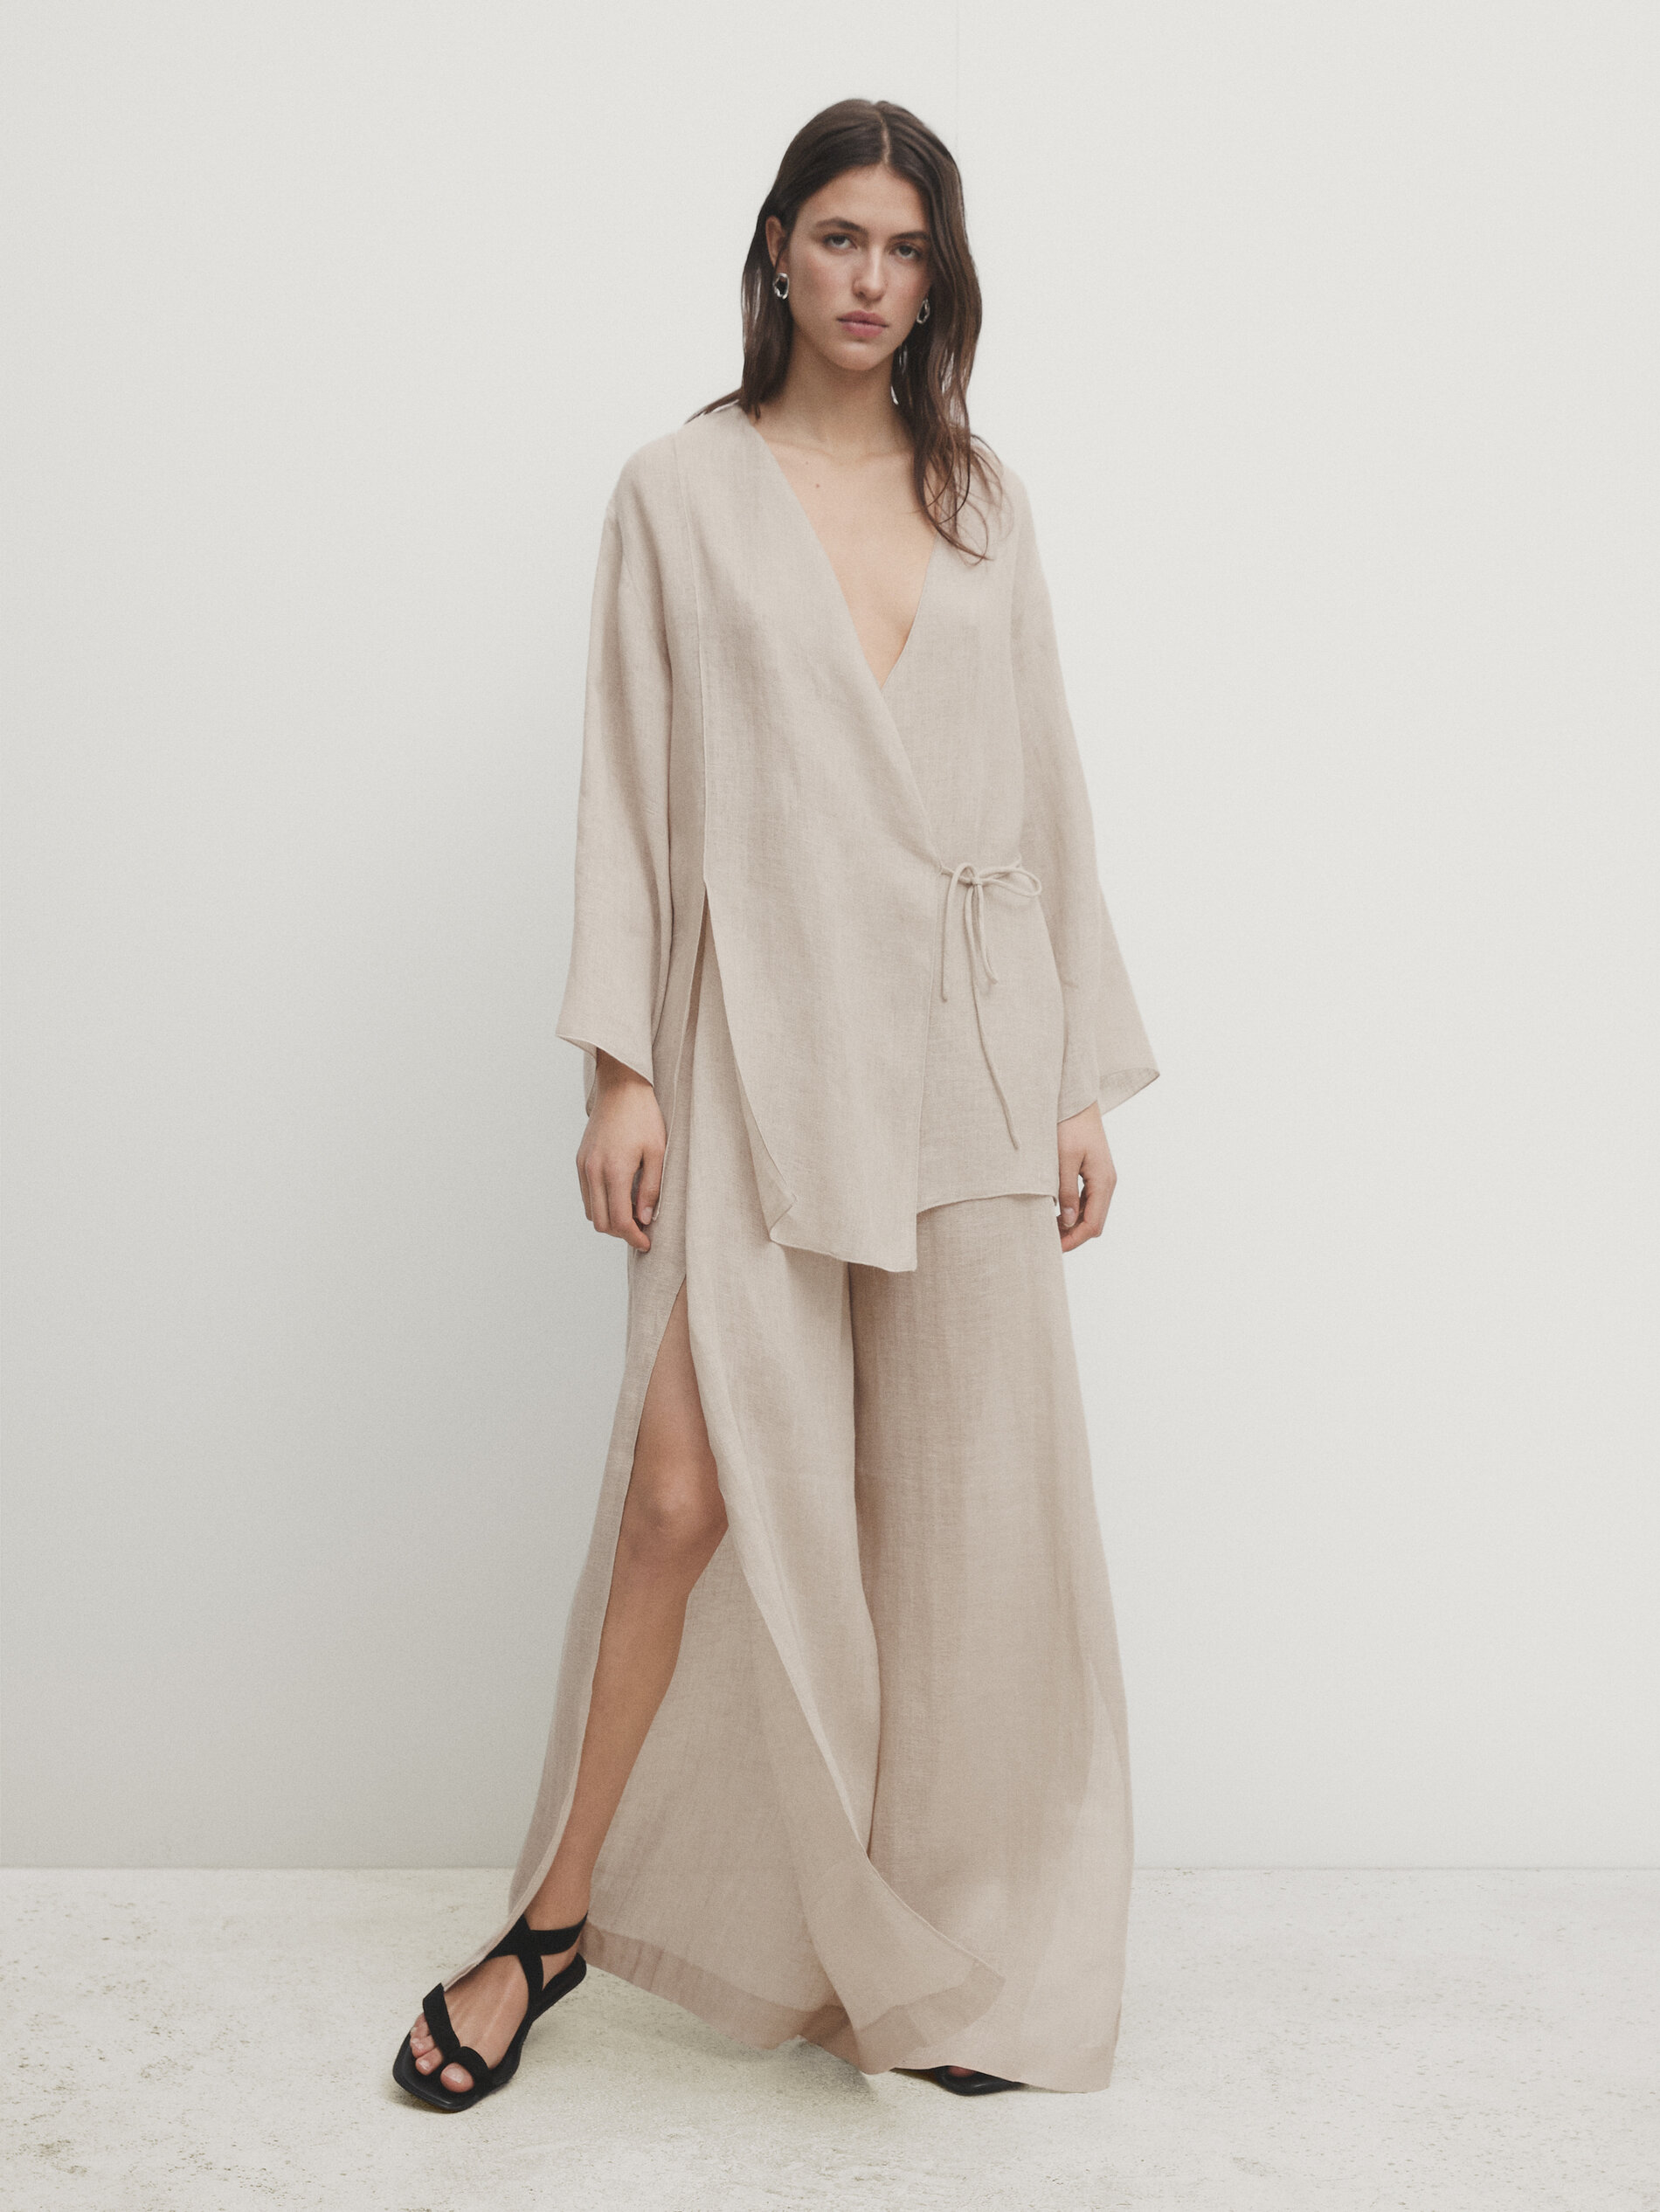 100% linen flowing crossover kimono with vent details